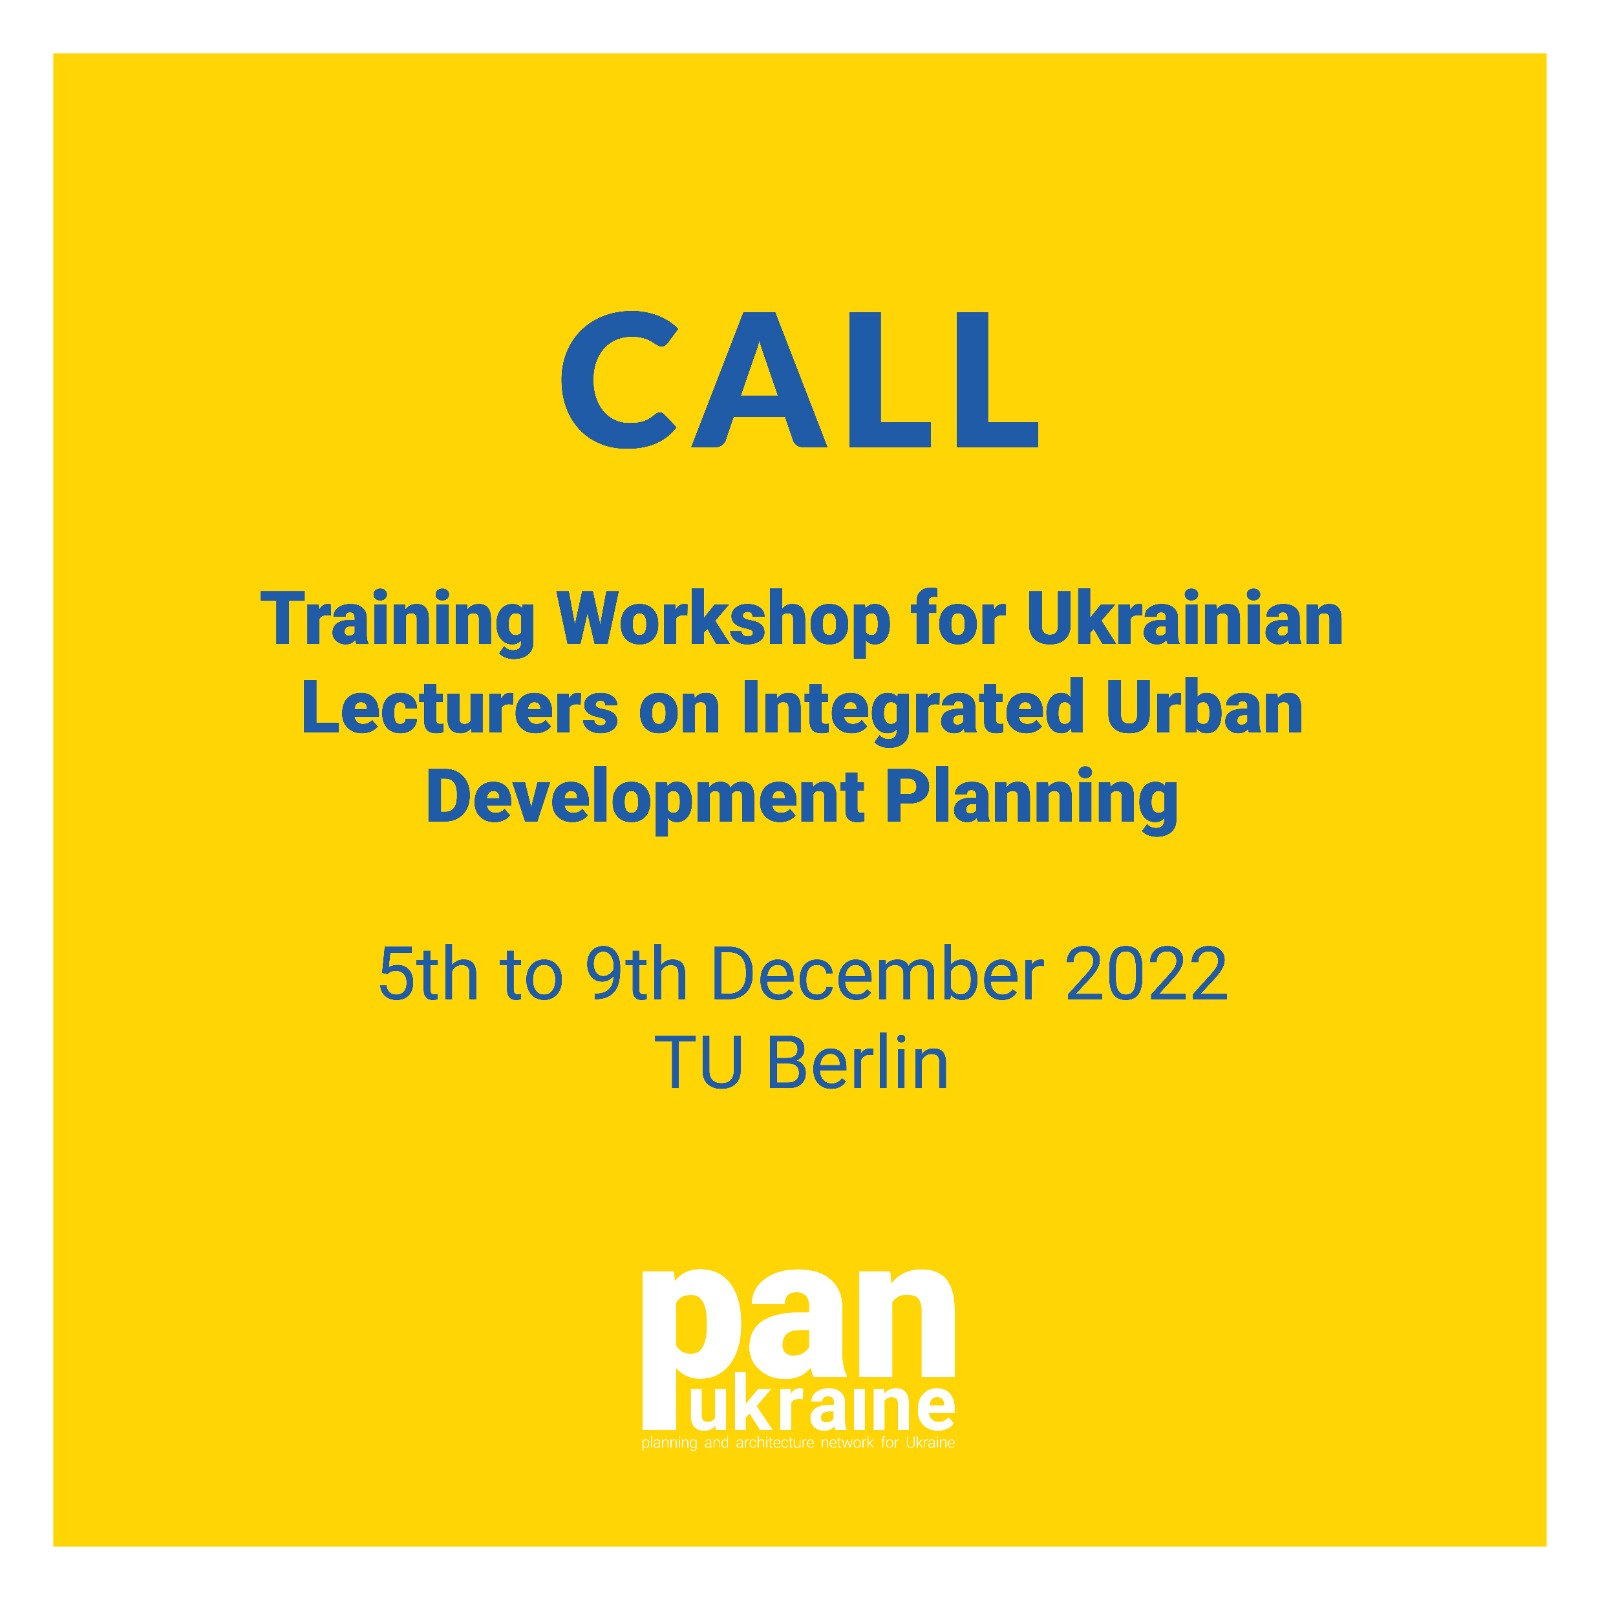 You are currently viewing Call for Application Training Workshop for Ukrainian Lecturers Integrated Urban Development Planning TU Berlin | 5th to 9th December 2022